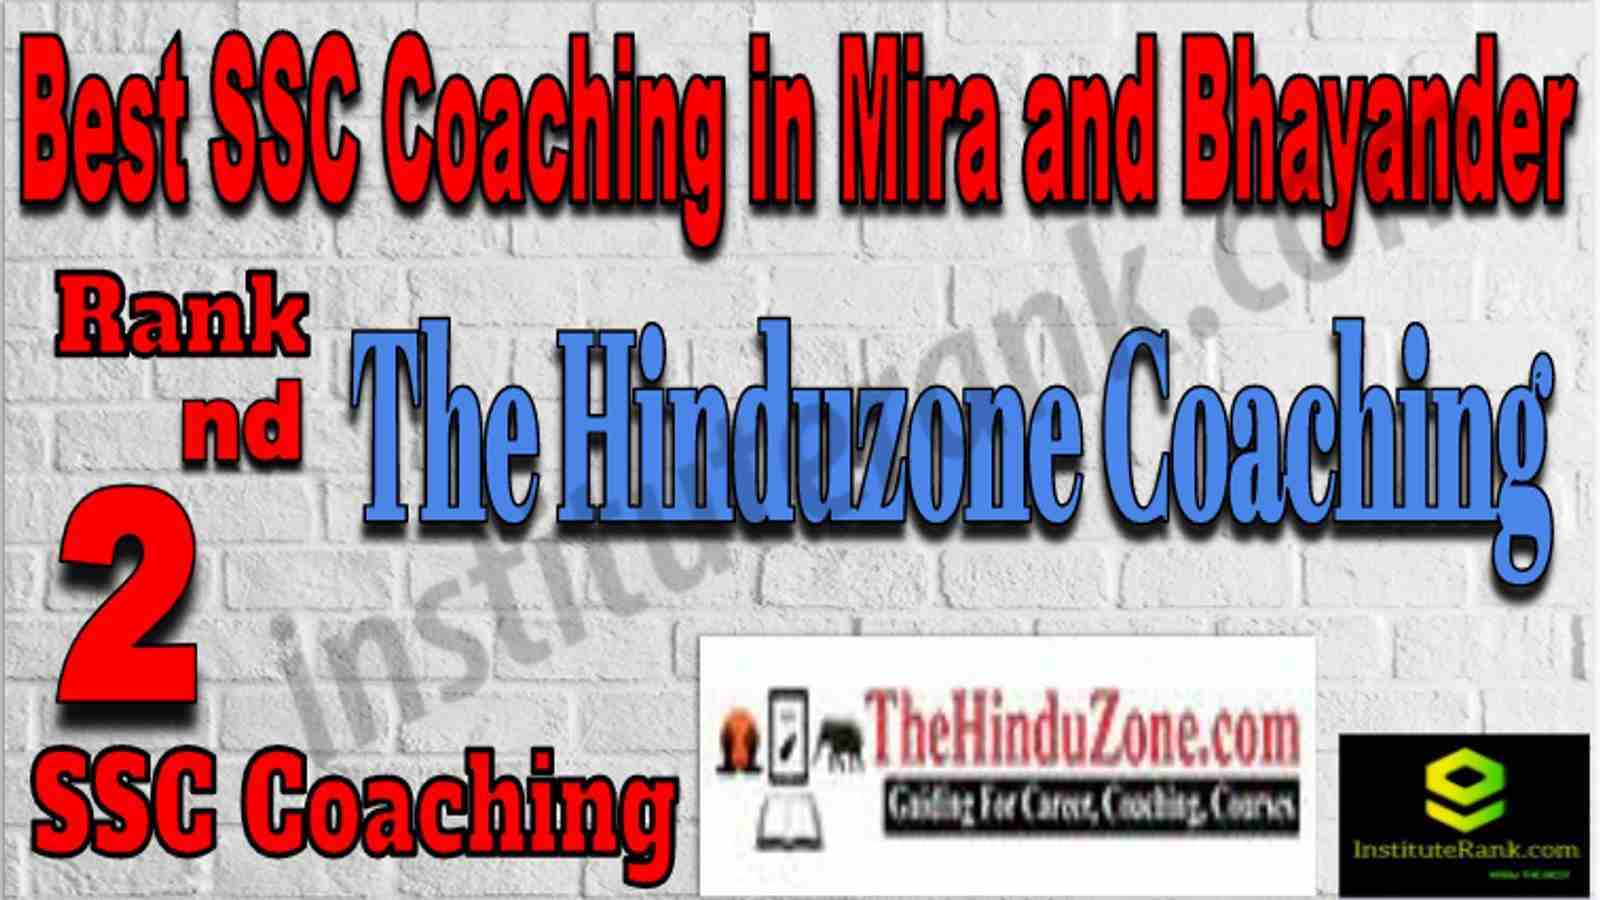 Rank 2 Best SSC Coaching in Mira and Bhayander